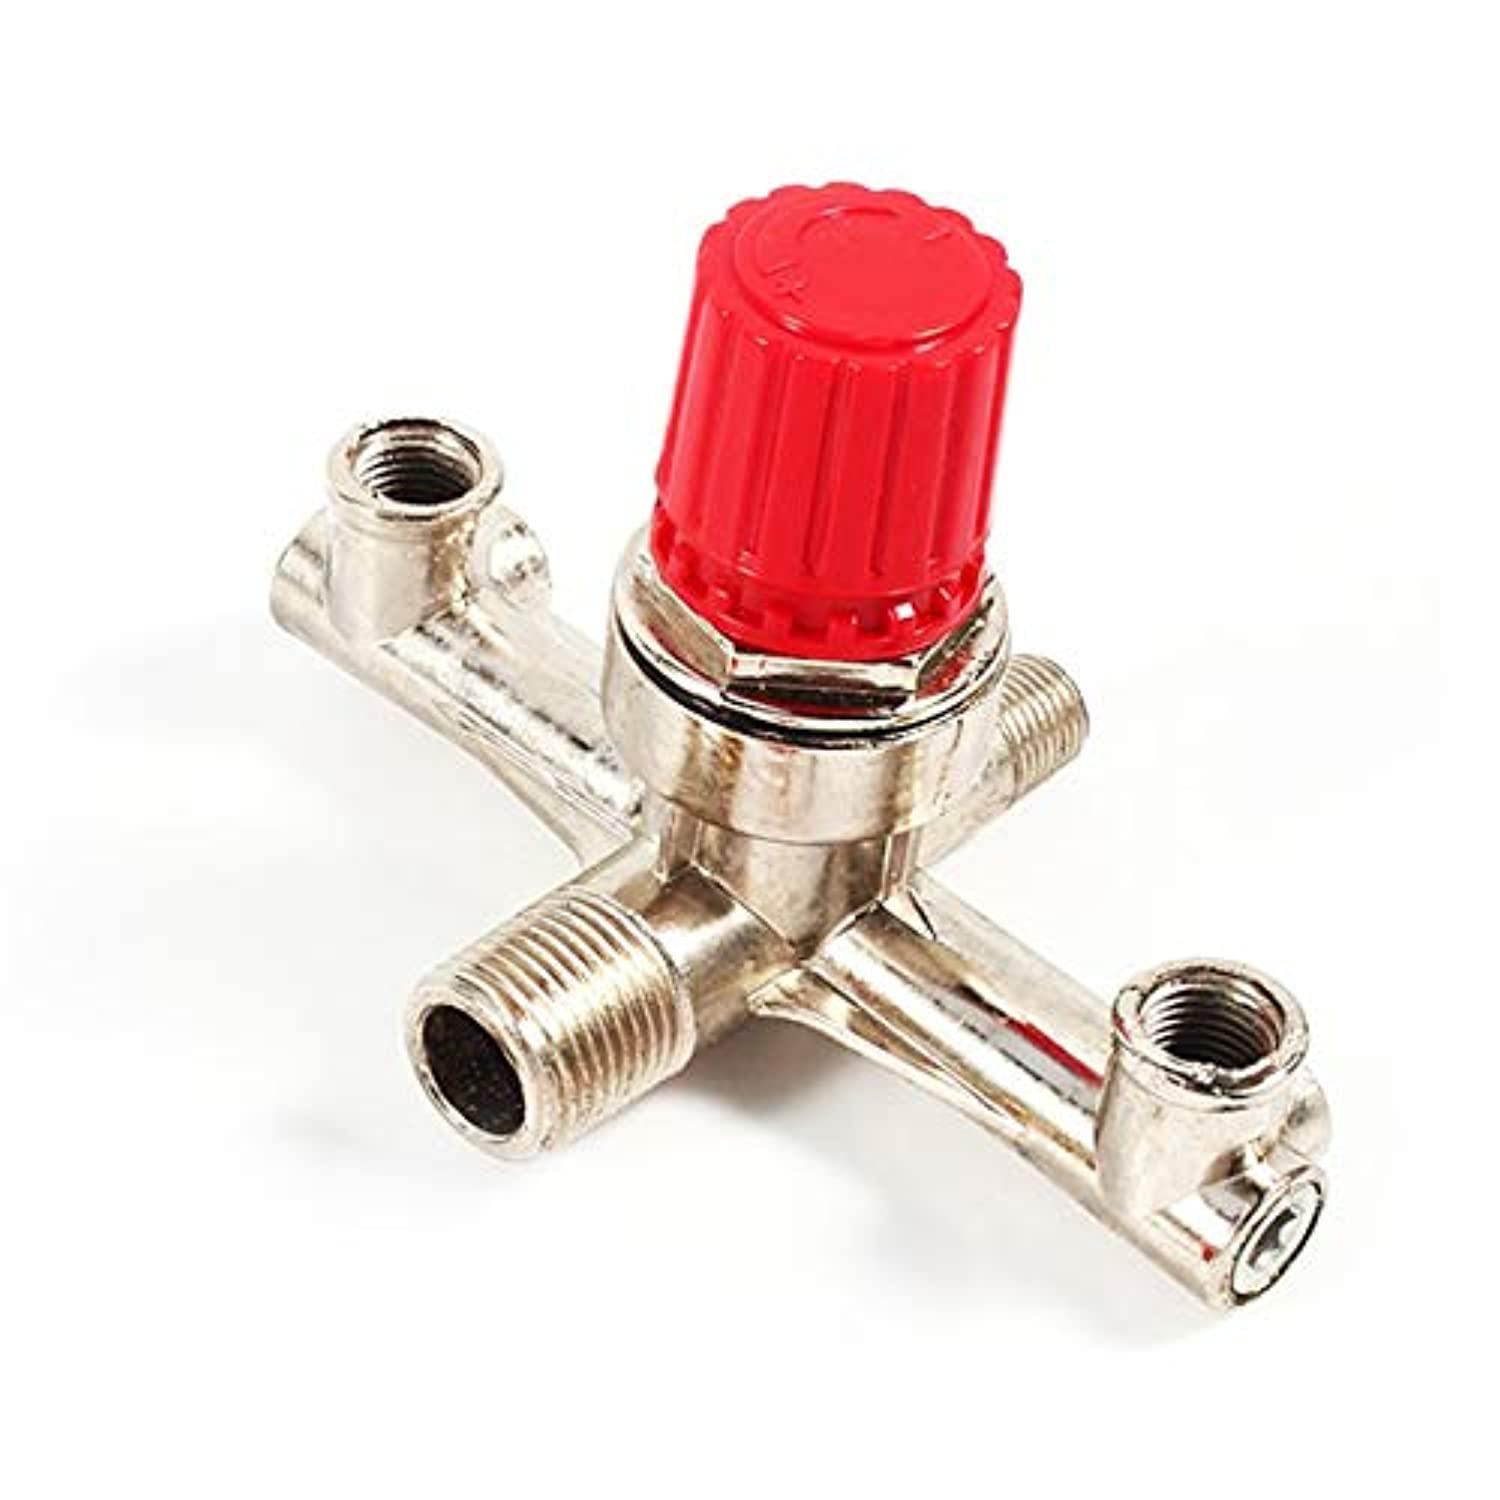 comok double outlet tube zinc alloy air compressor fittings red cap regulator pressure valve switch manifold part accessories